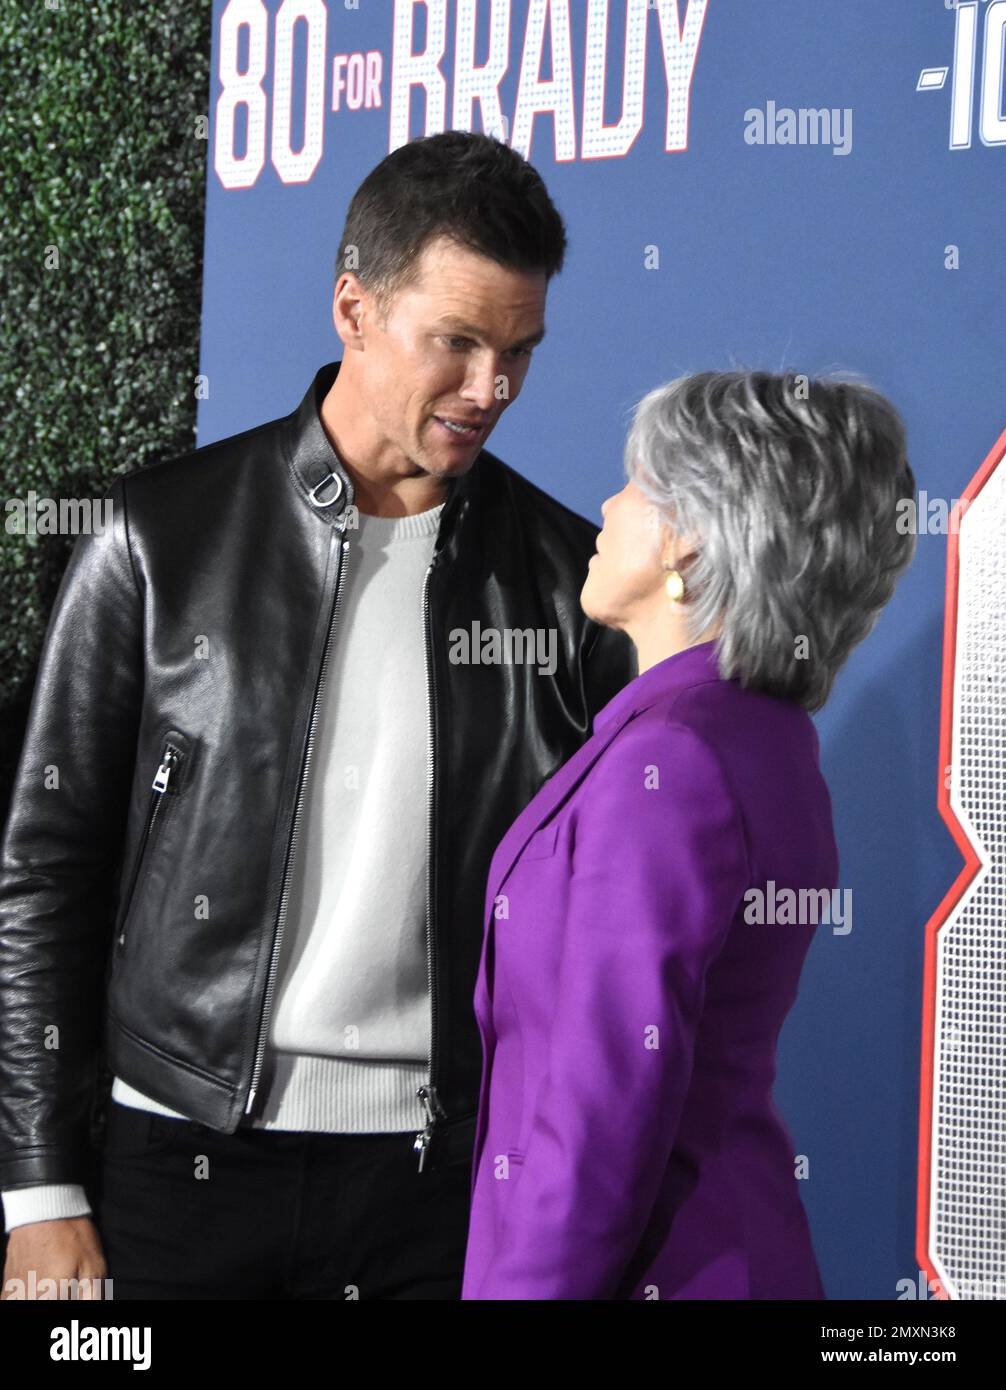 Los Angeles, California, USA 31st January 2023 Tom Brady and Actress Jane Fonda attend the Los Angeles Premiere Screening of Paramount Pictures' '80 for Brady' at Regency Village Theatre on January 31, 2023 in Los Angeles, California, USA. Photo by Barry King/Alamy Stock Photo Stock Photo